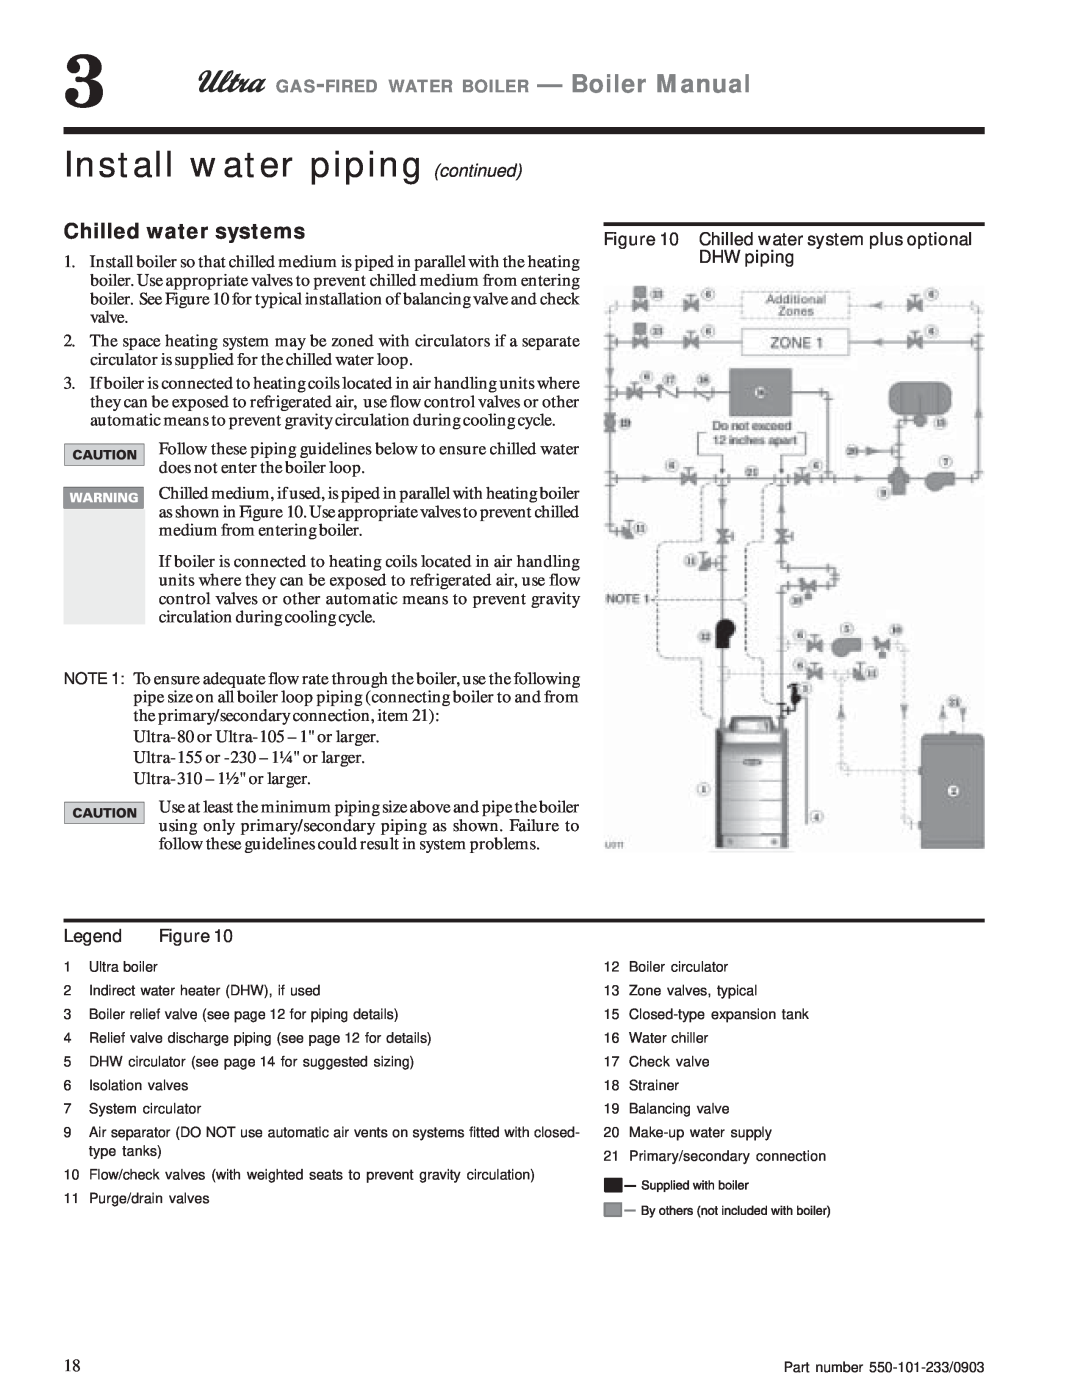 Weil-McLain 105 Install water piping continued, Chilled water systems, GAS-FIRED WATER BOILER - Boiler Manual, DHW piping 